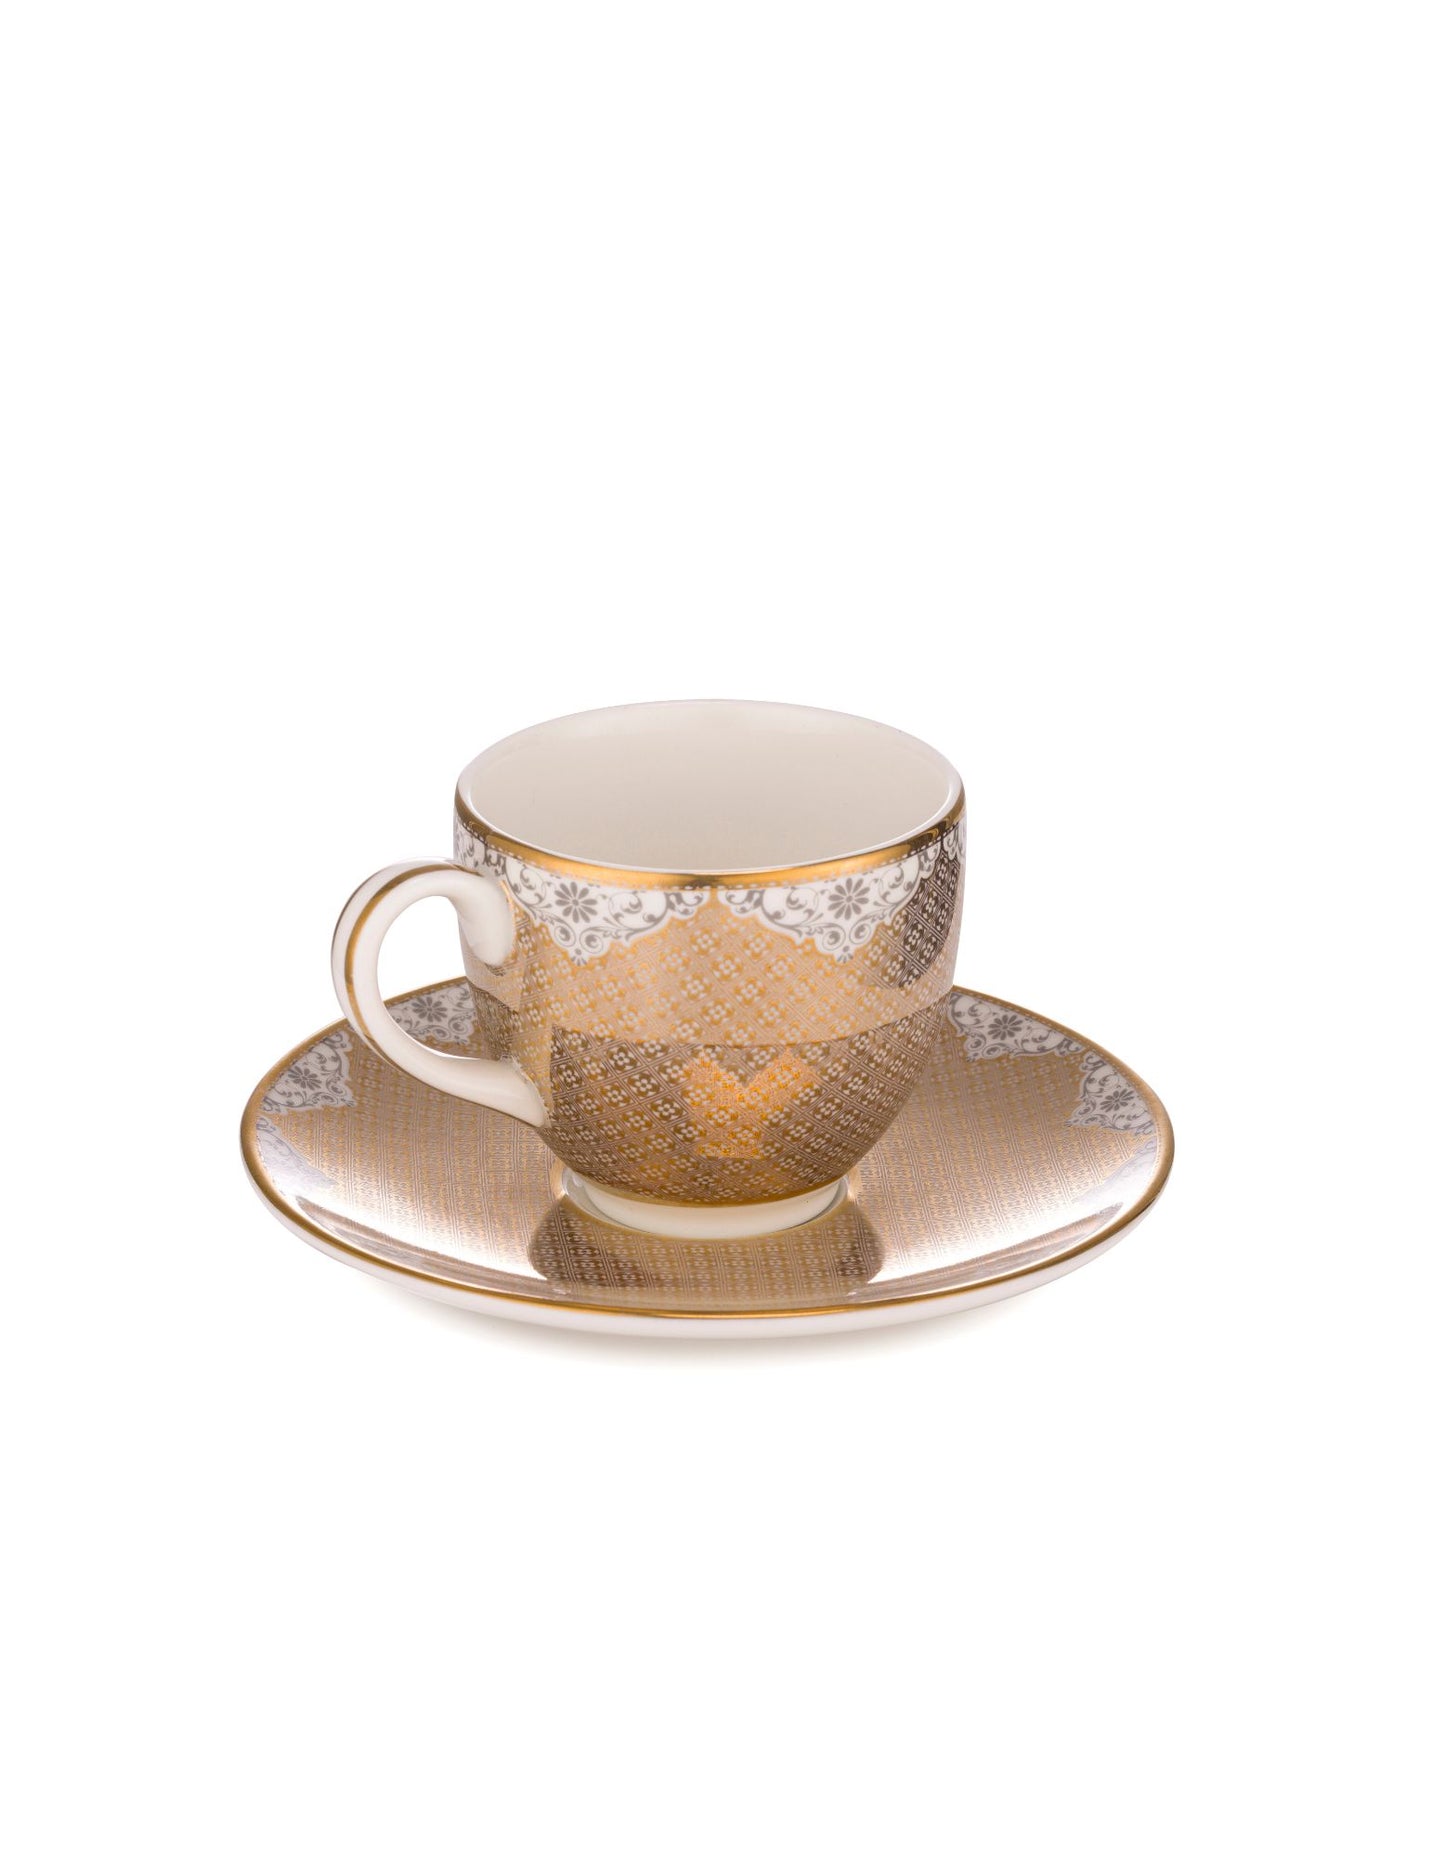 Mirror Collection - Cup And Saucer (2pc)